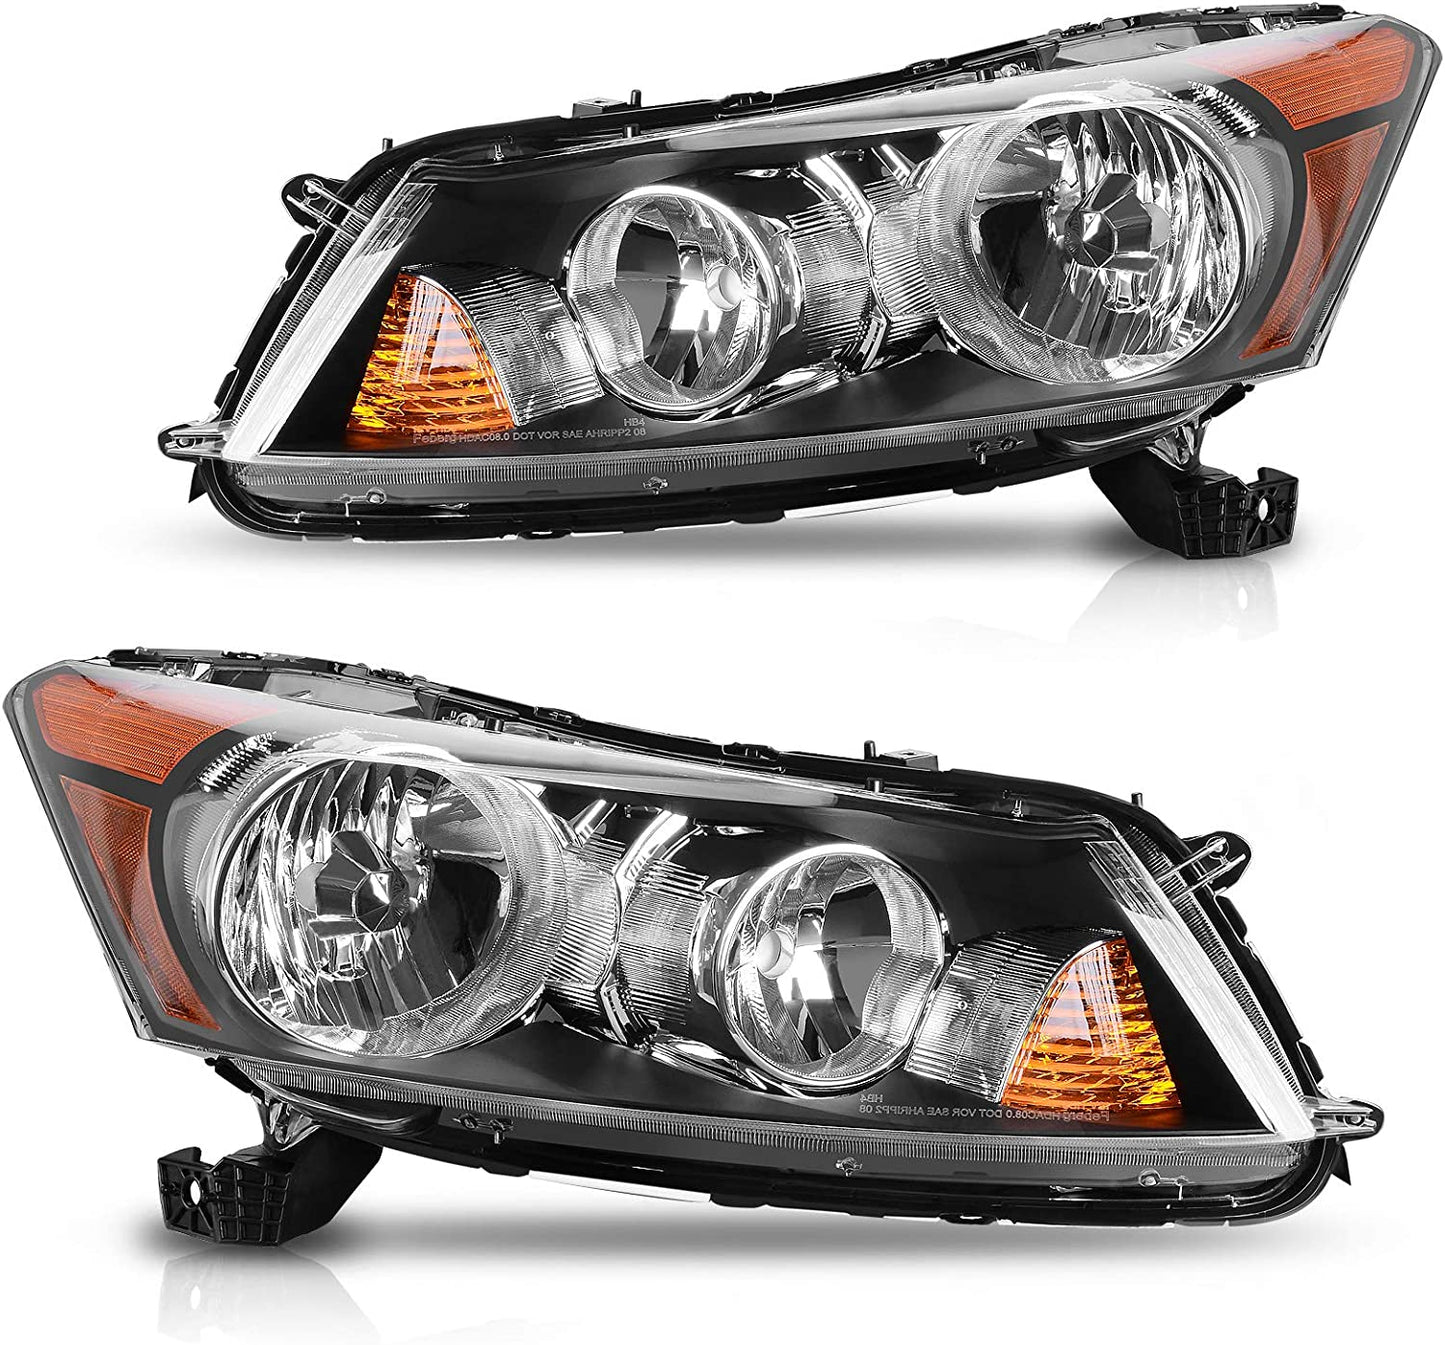 DWVO Headlight Assembly Compatible with 08-12 Accord 4-Door Sedan 2008 2009 2010 2011 2012 Black Housing Clear Lens Amber Reflector